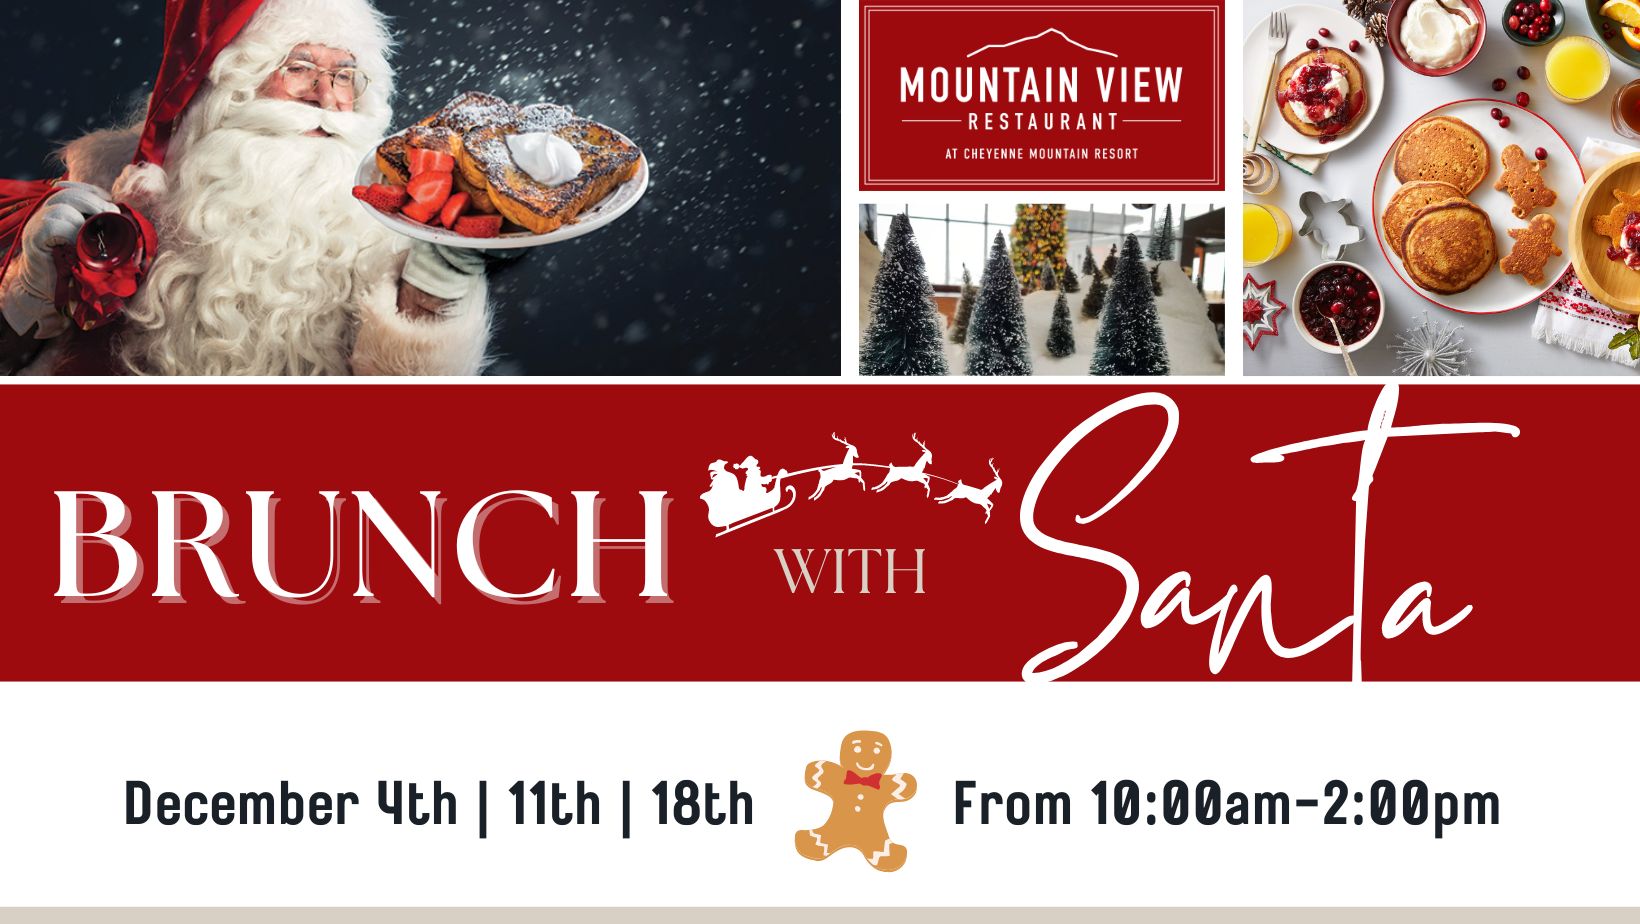 brunch with Santa at Mountain View Restaurant at Cheyenne Mountain Resort in Colorado Springs